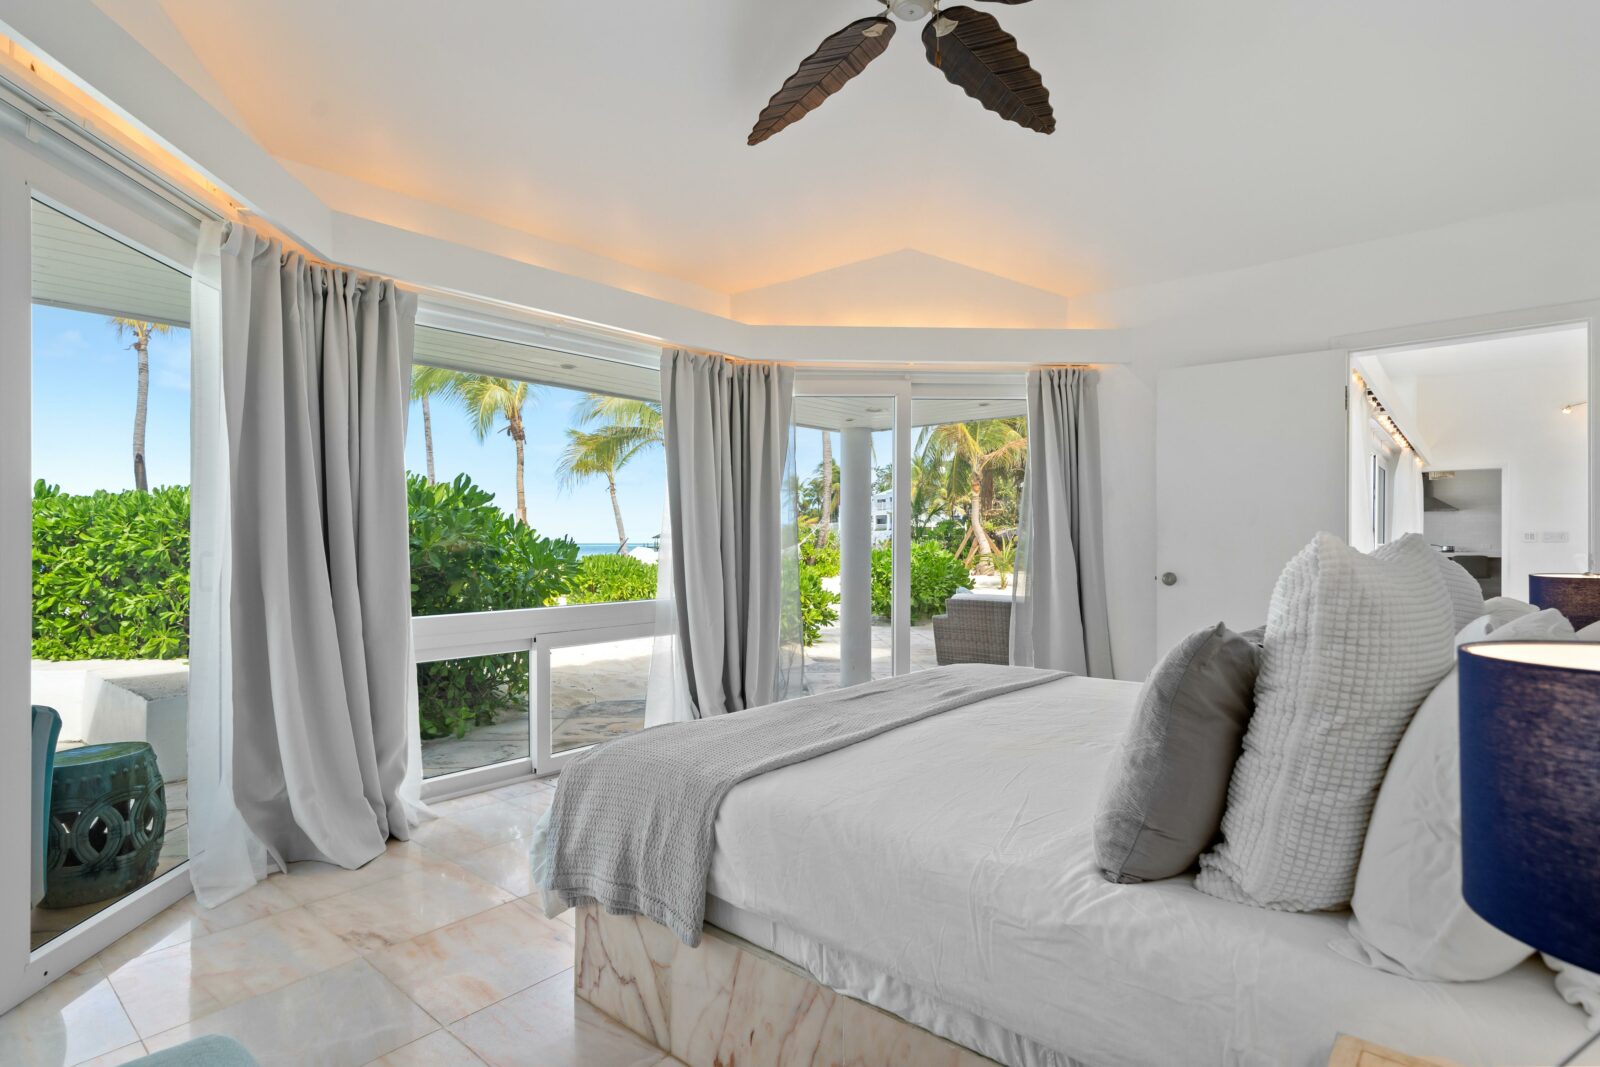 Primary bedroom inside a beachfront home in The Bahamas